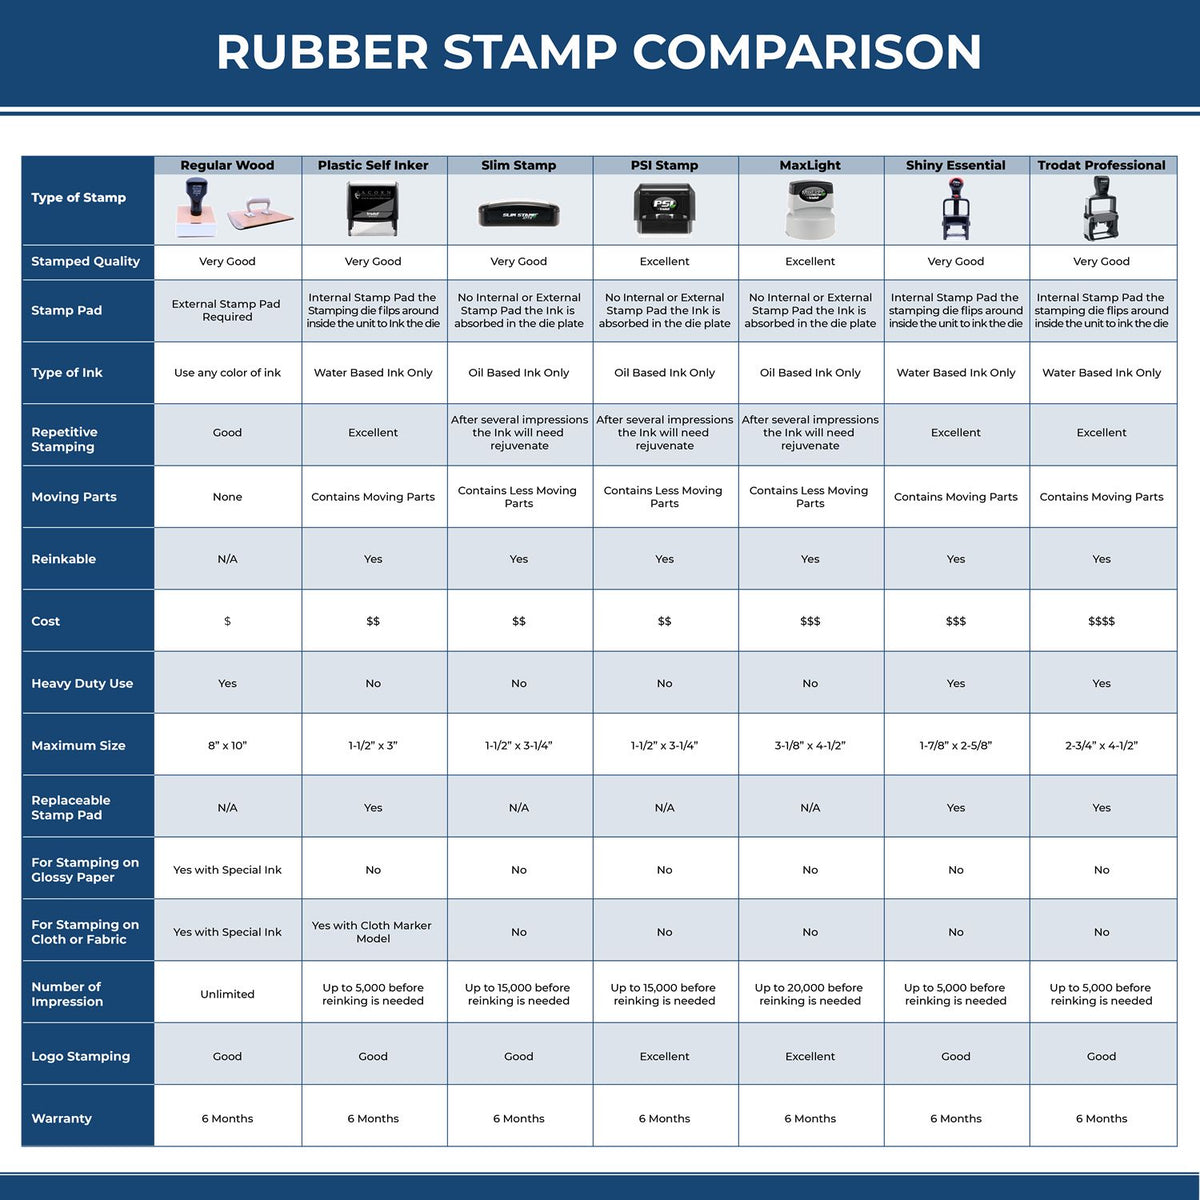 Large Priority Rubber Stamp 4146R Rubber Stamp Comparison